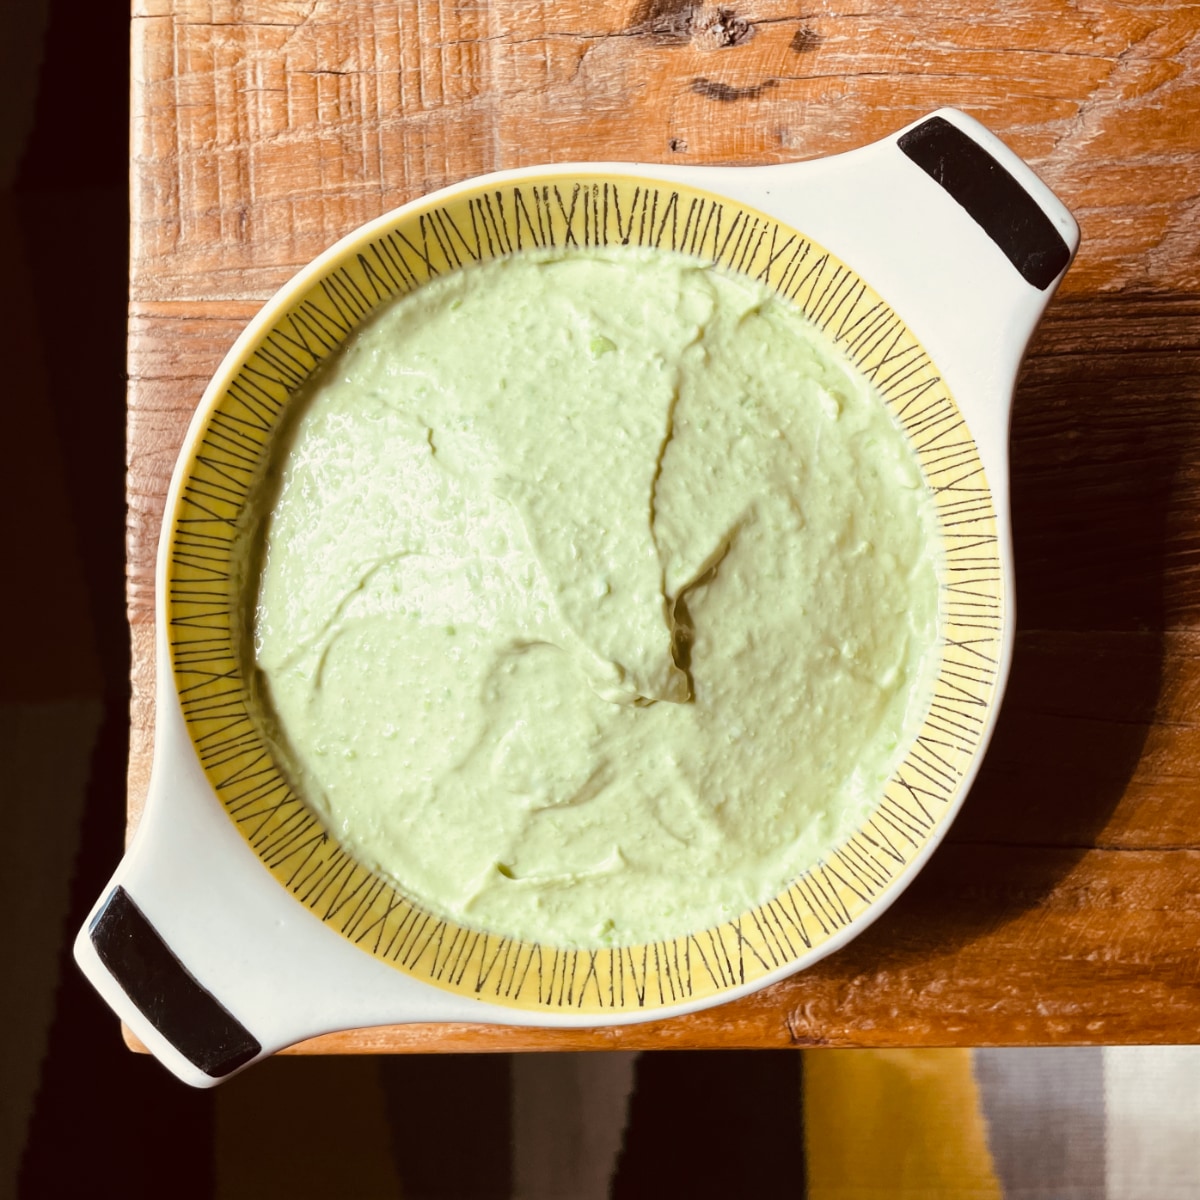 A pale, greenish-yellow dip in a bowl on a wooden table.